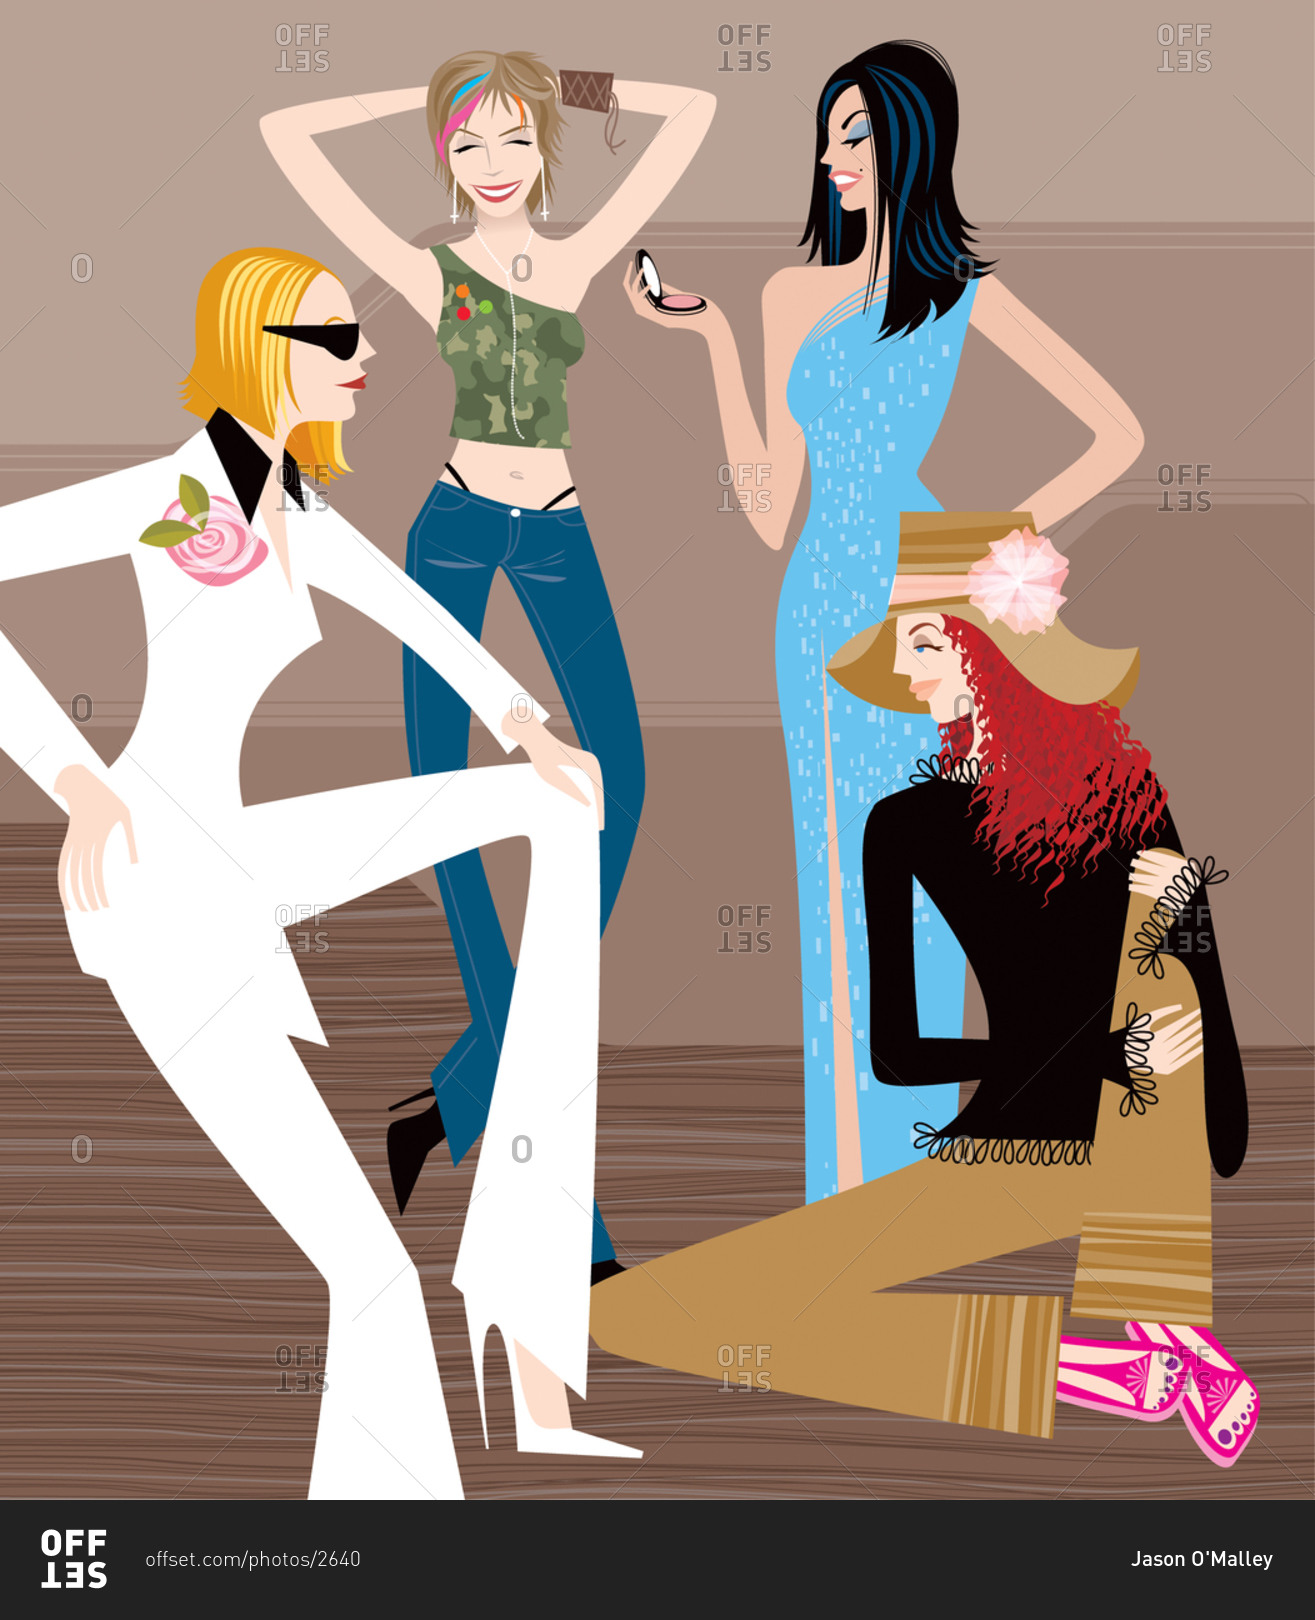 Four sexy women with different personal styles: minimal in white, hipster in jeans and camouflage, glamorous in gown, bohemian in hat and bell bottoms with sandals